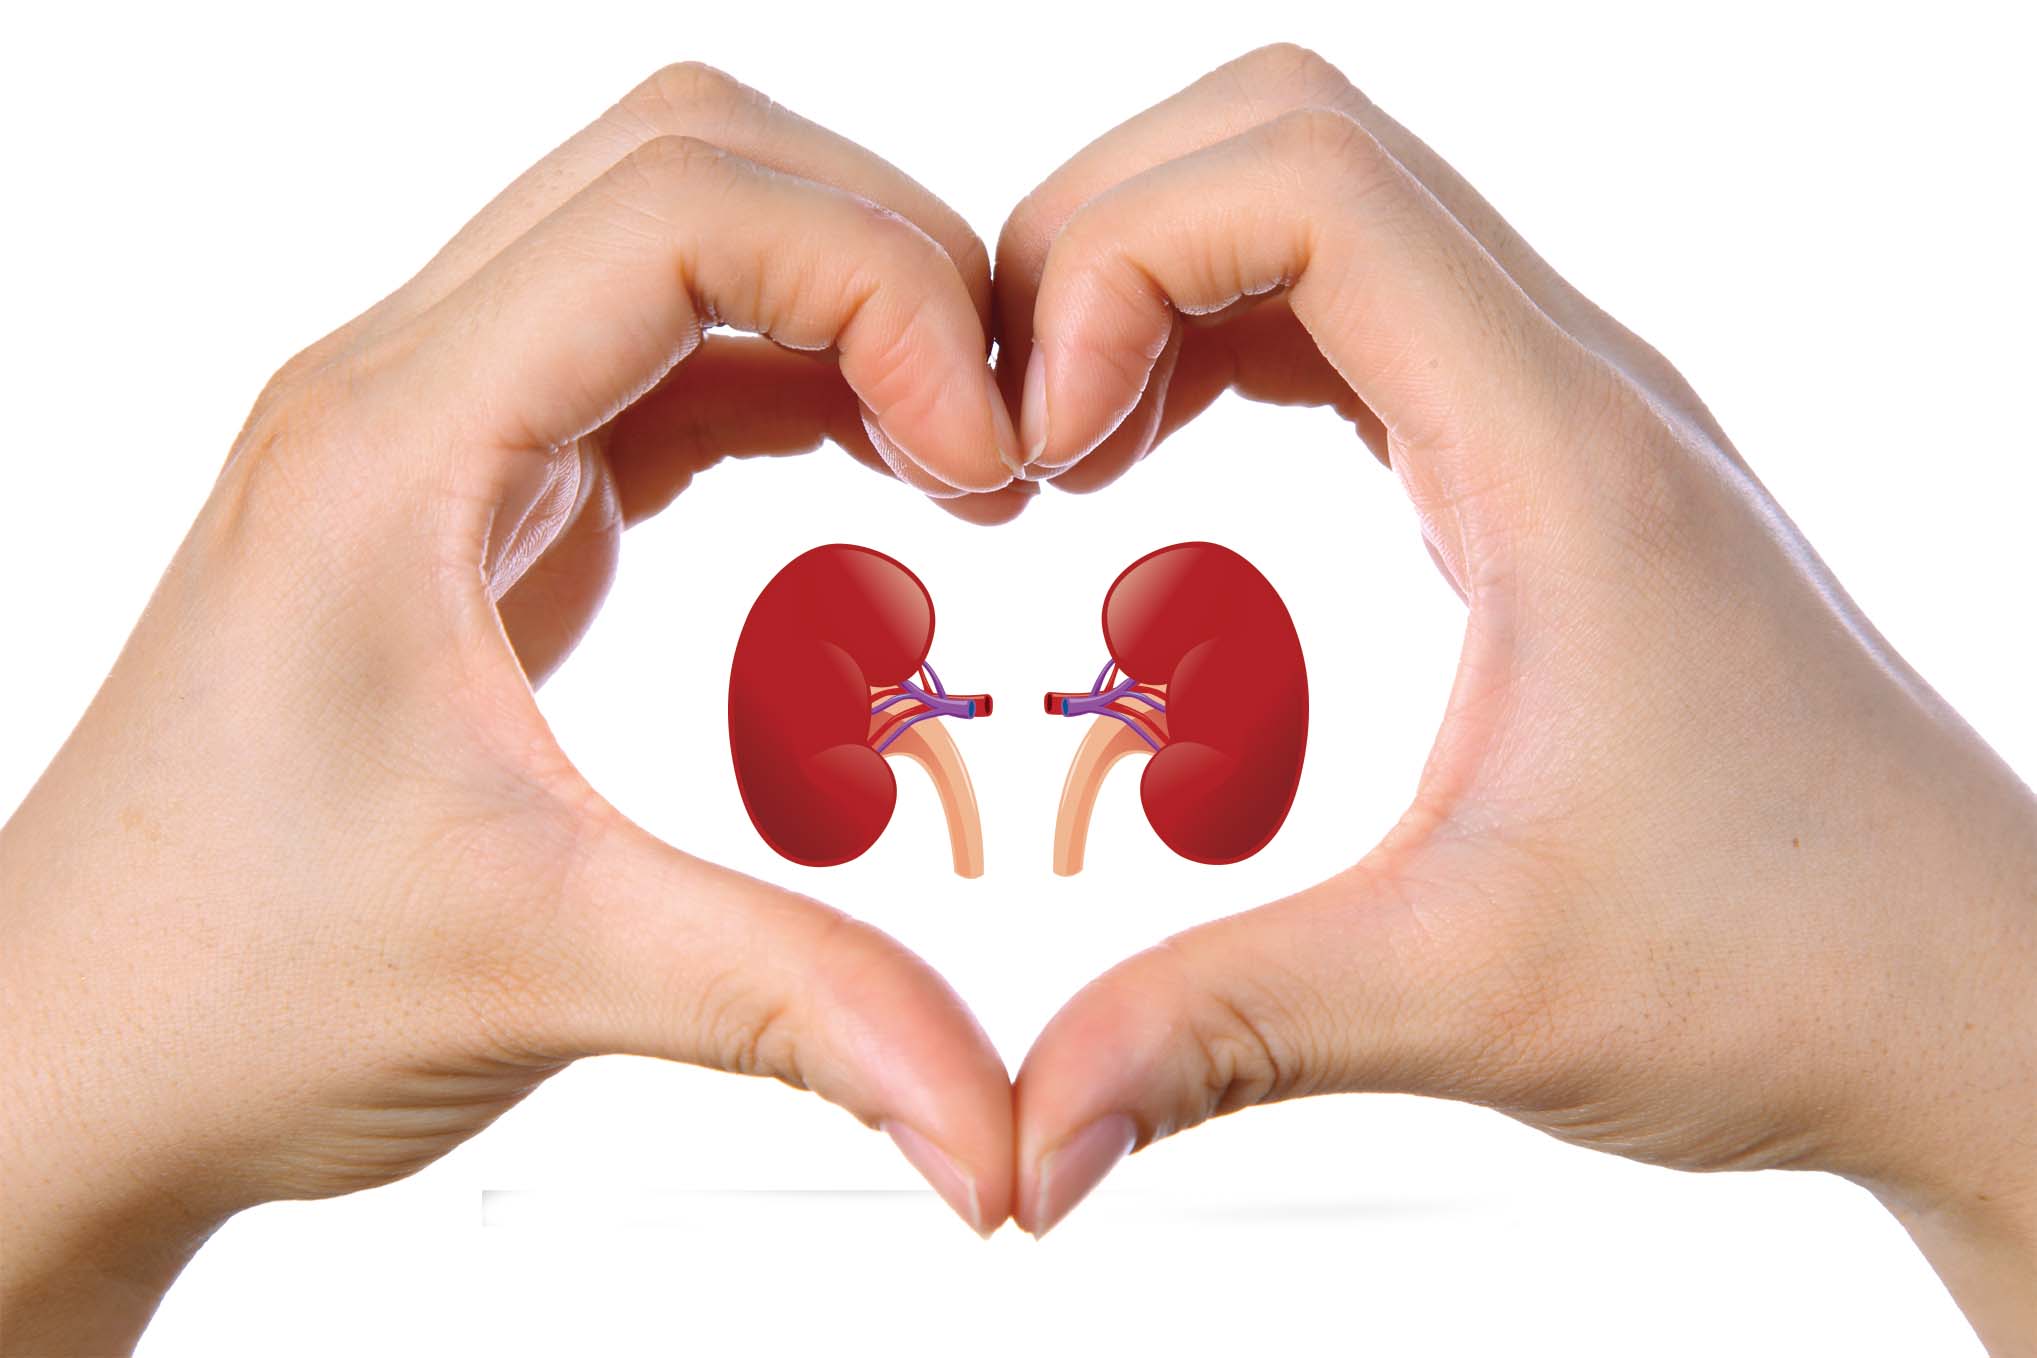 Kidney care with natural products calmya